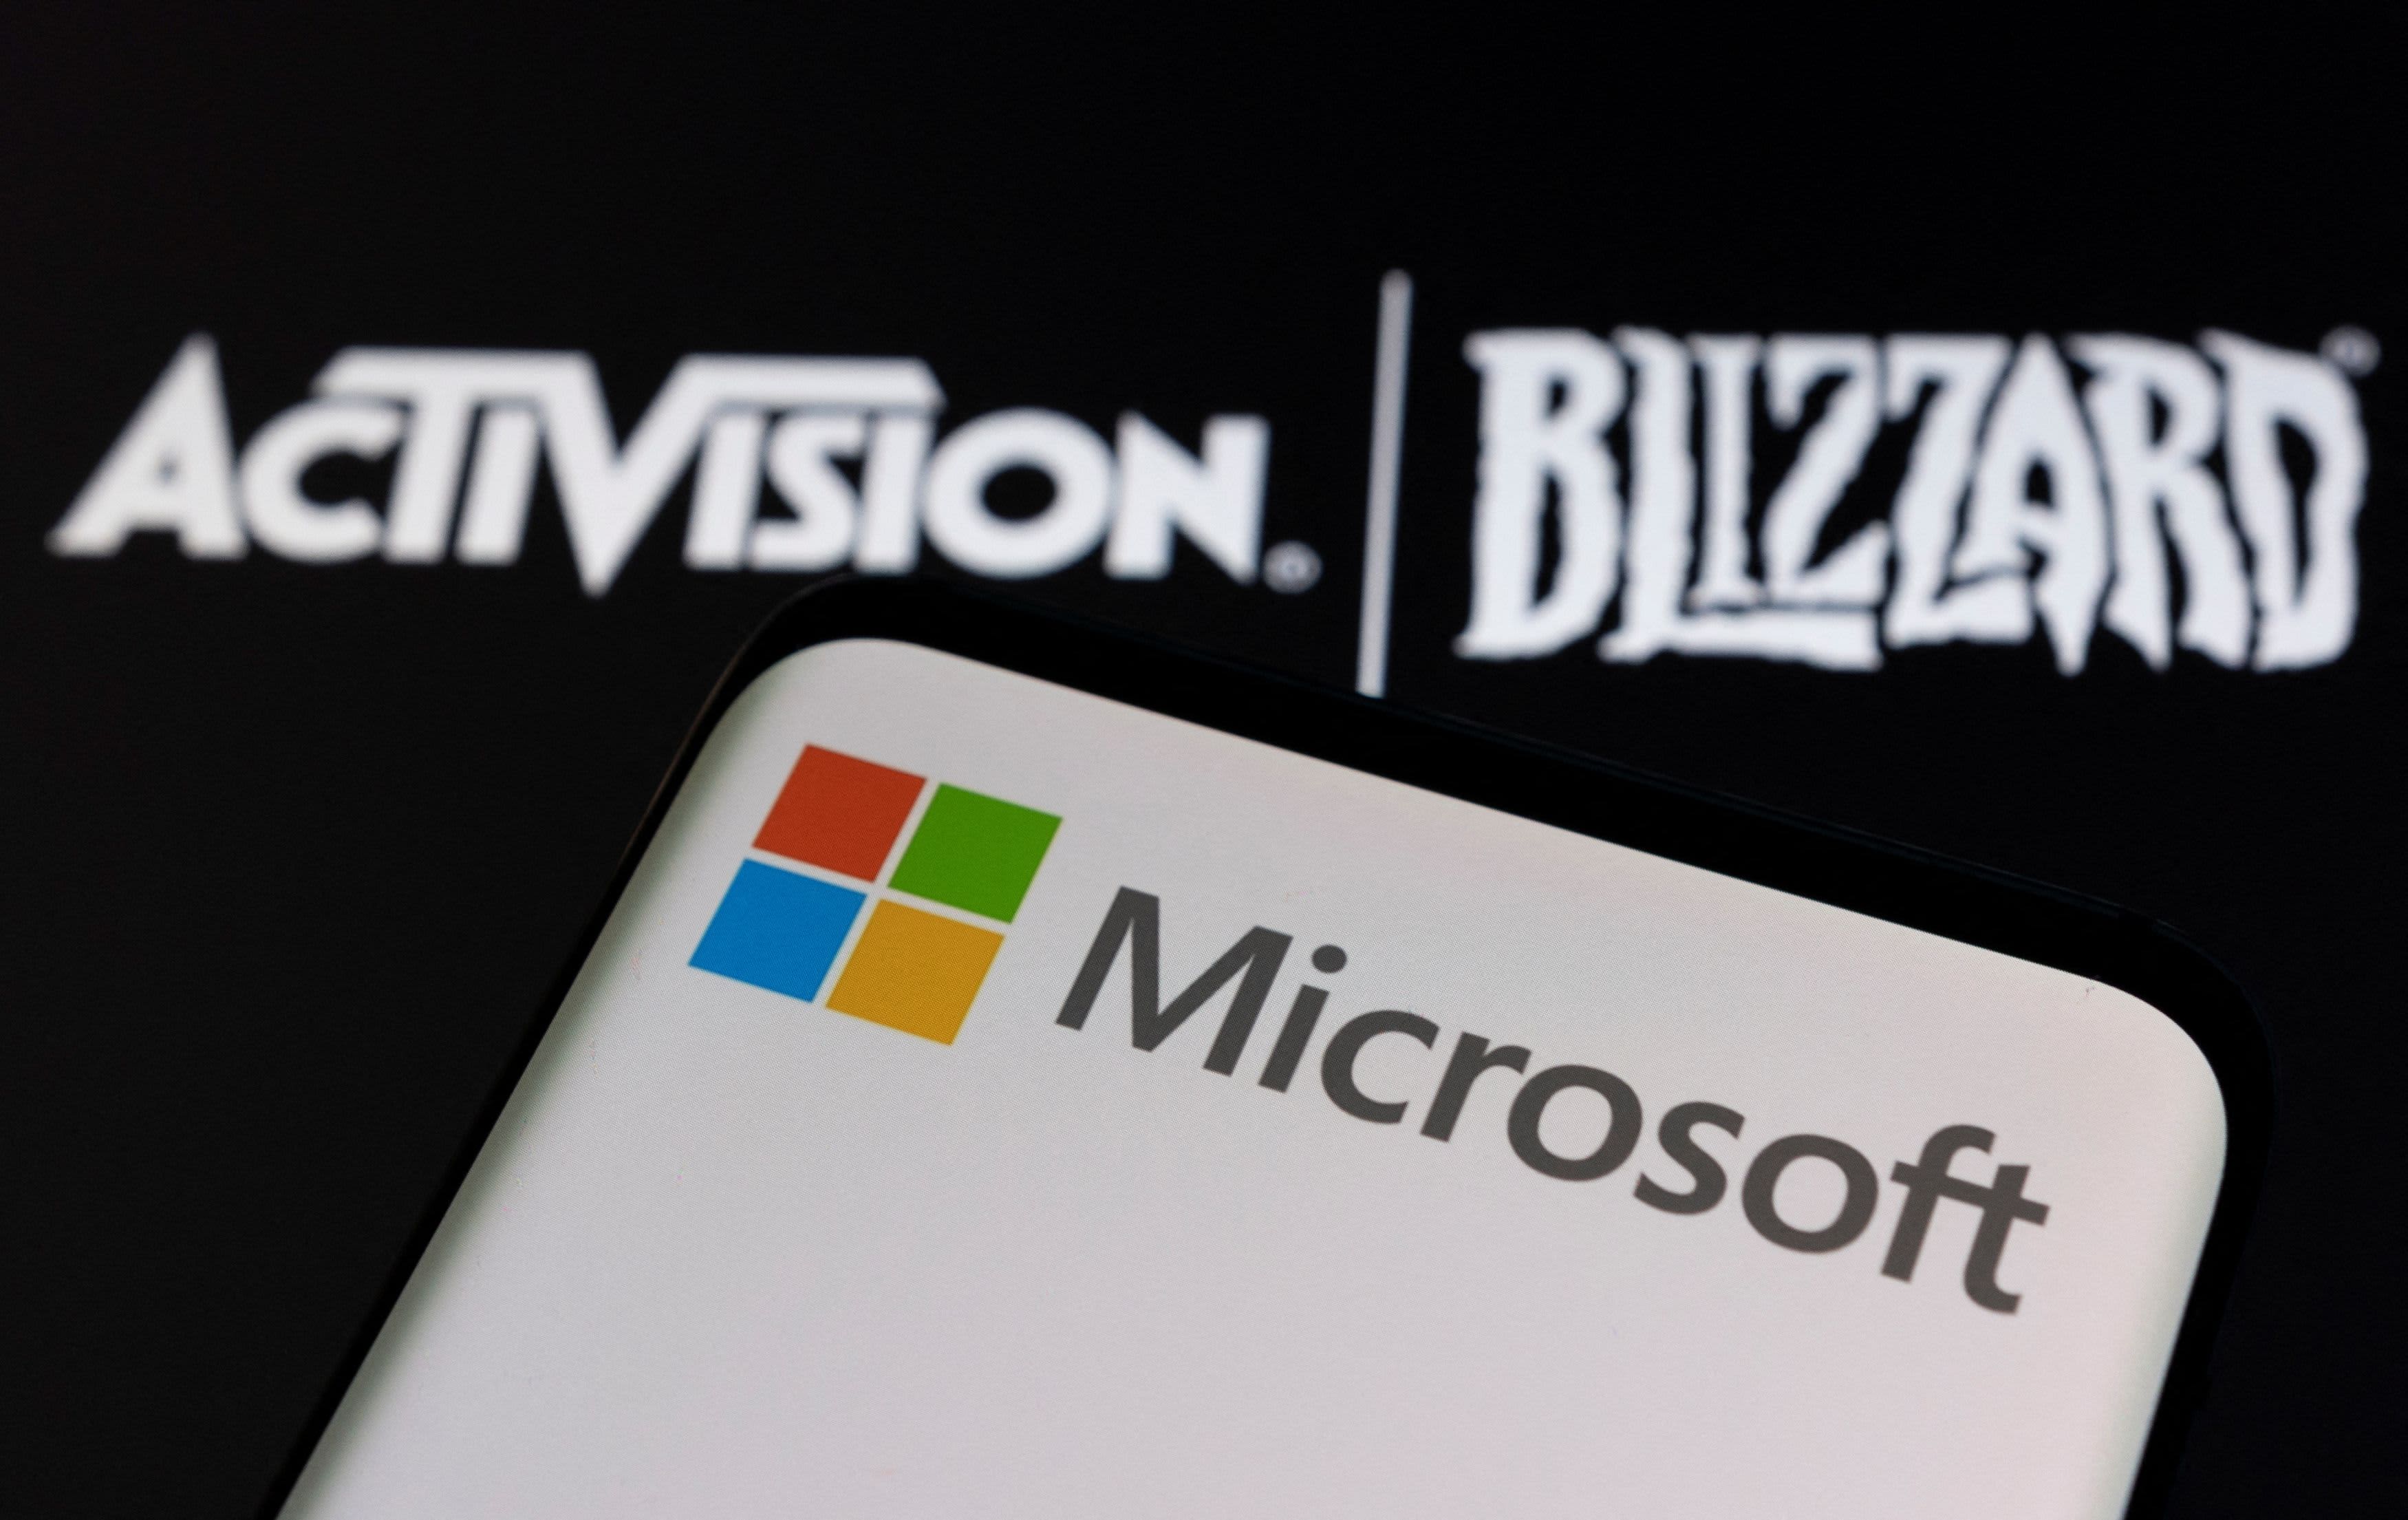 Xbox's Activision deal is already working: data suggests more US adults are  becoming interested in Game Pass